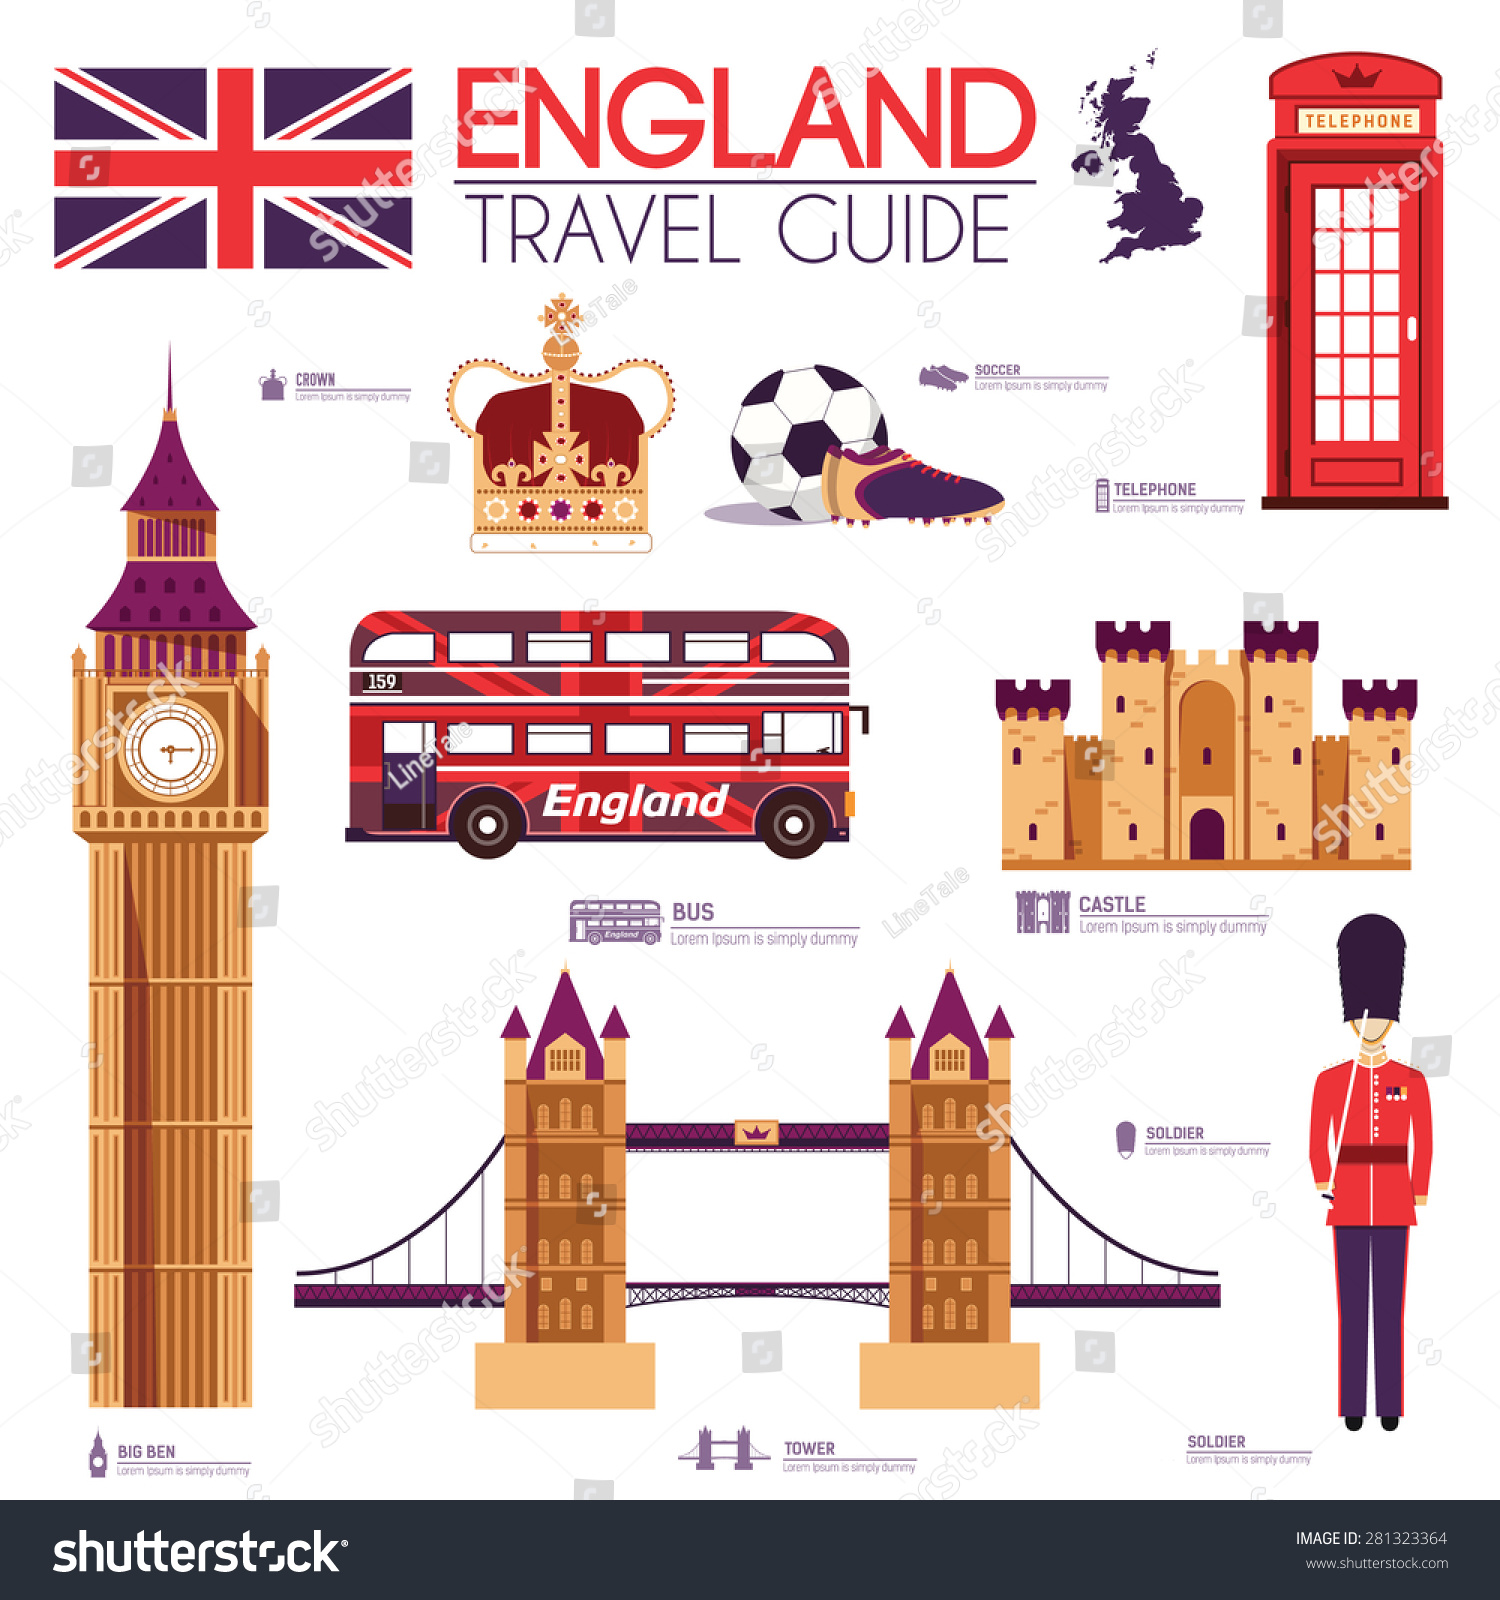 England Travel Guide by Rick Steves